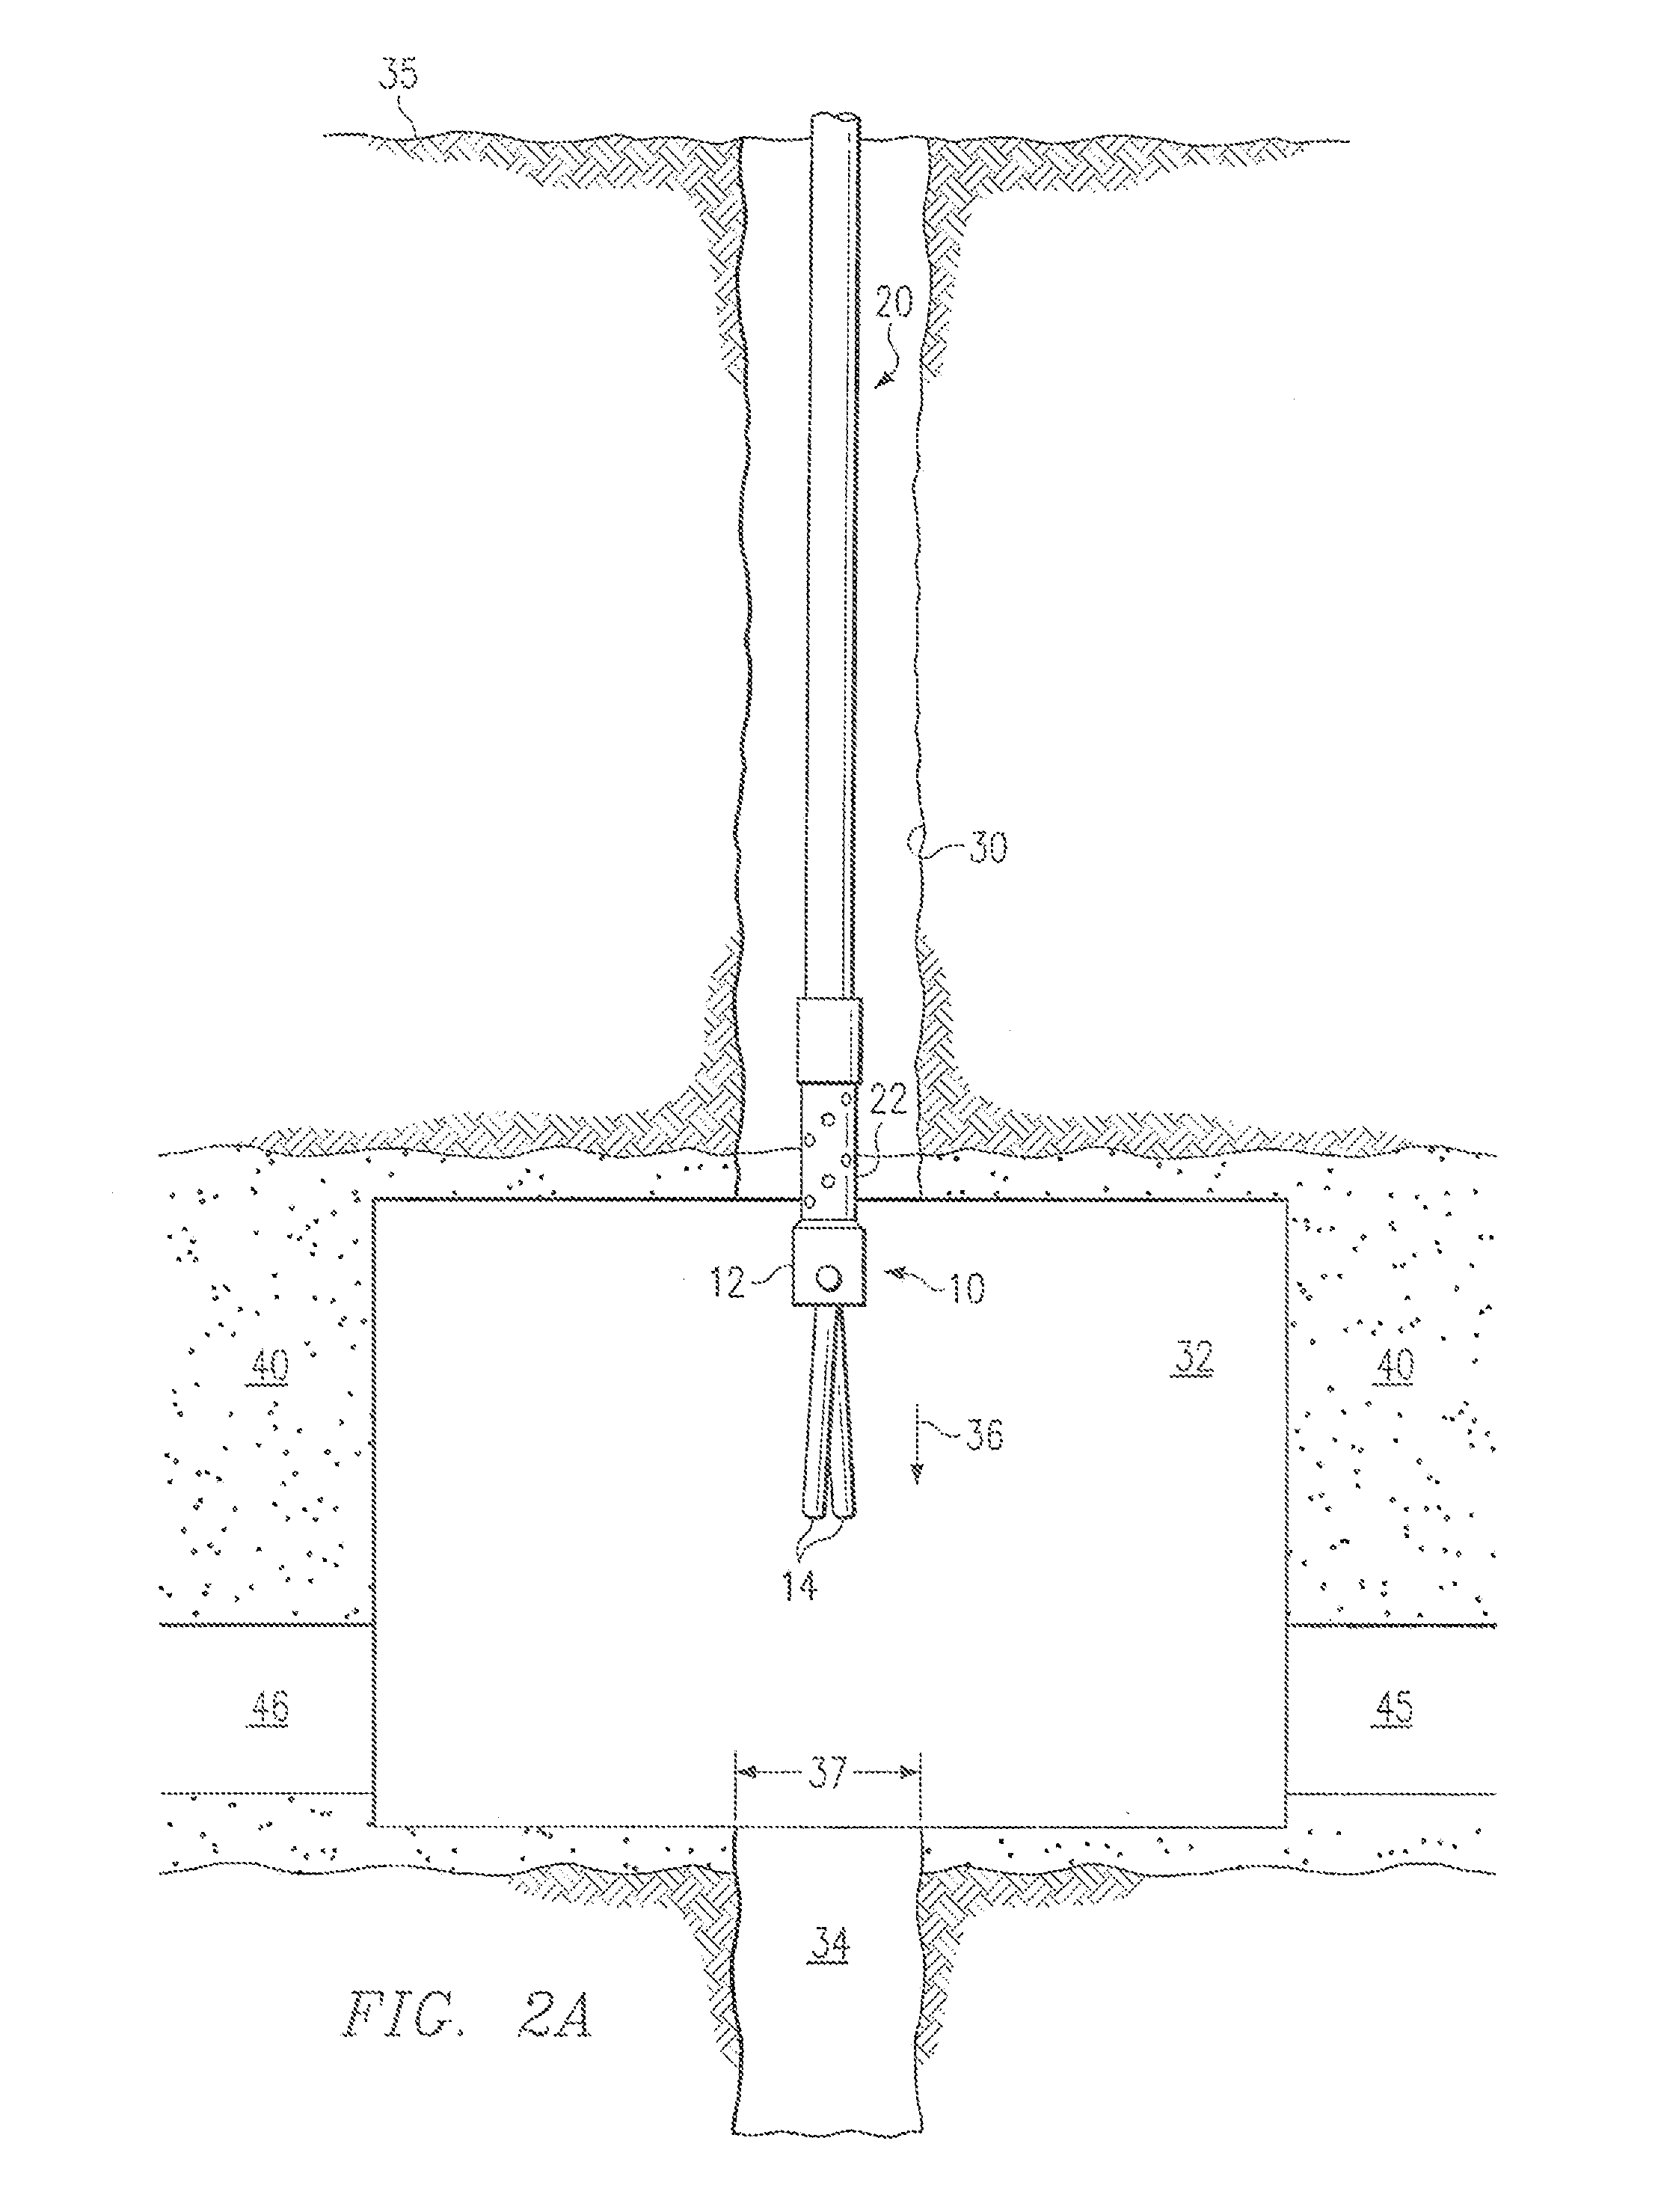 Cavity positioning tool and method